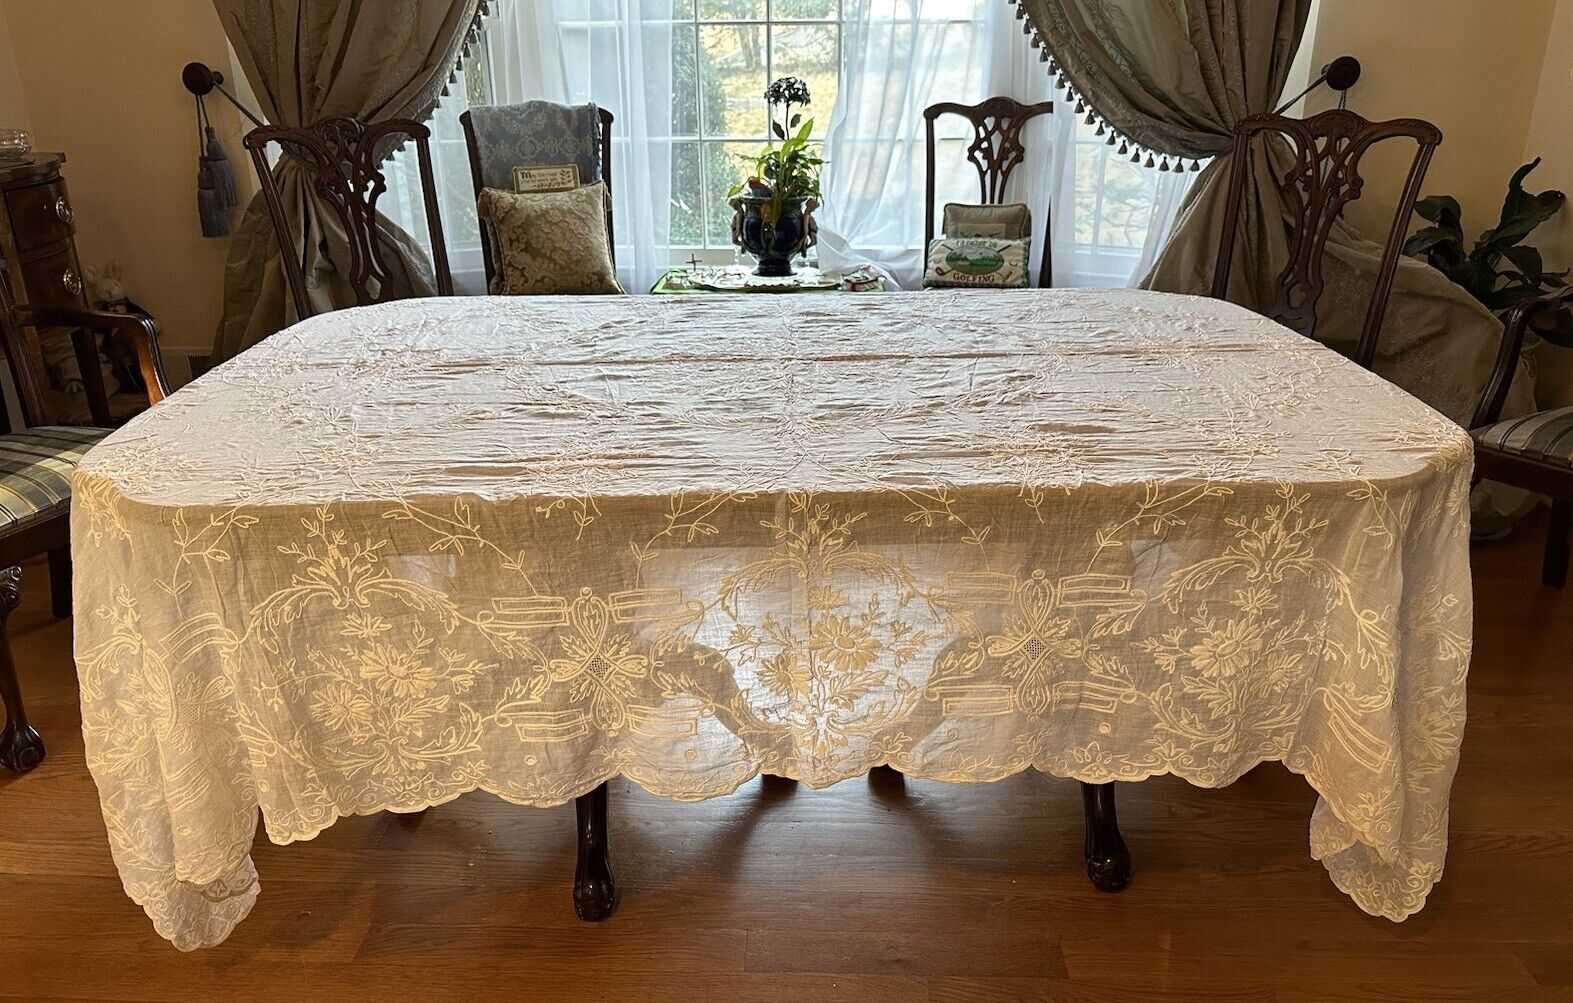 Vintage Banquet Tablecloth Hand Embroidered Swiss Lace Elegant Insets 100”x77”